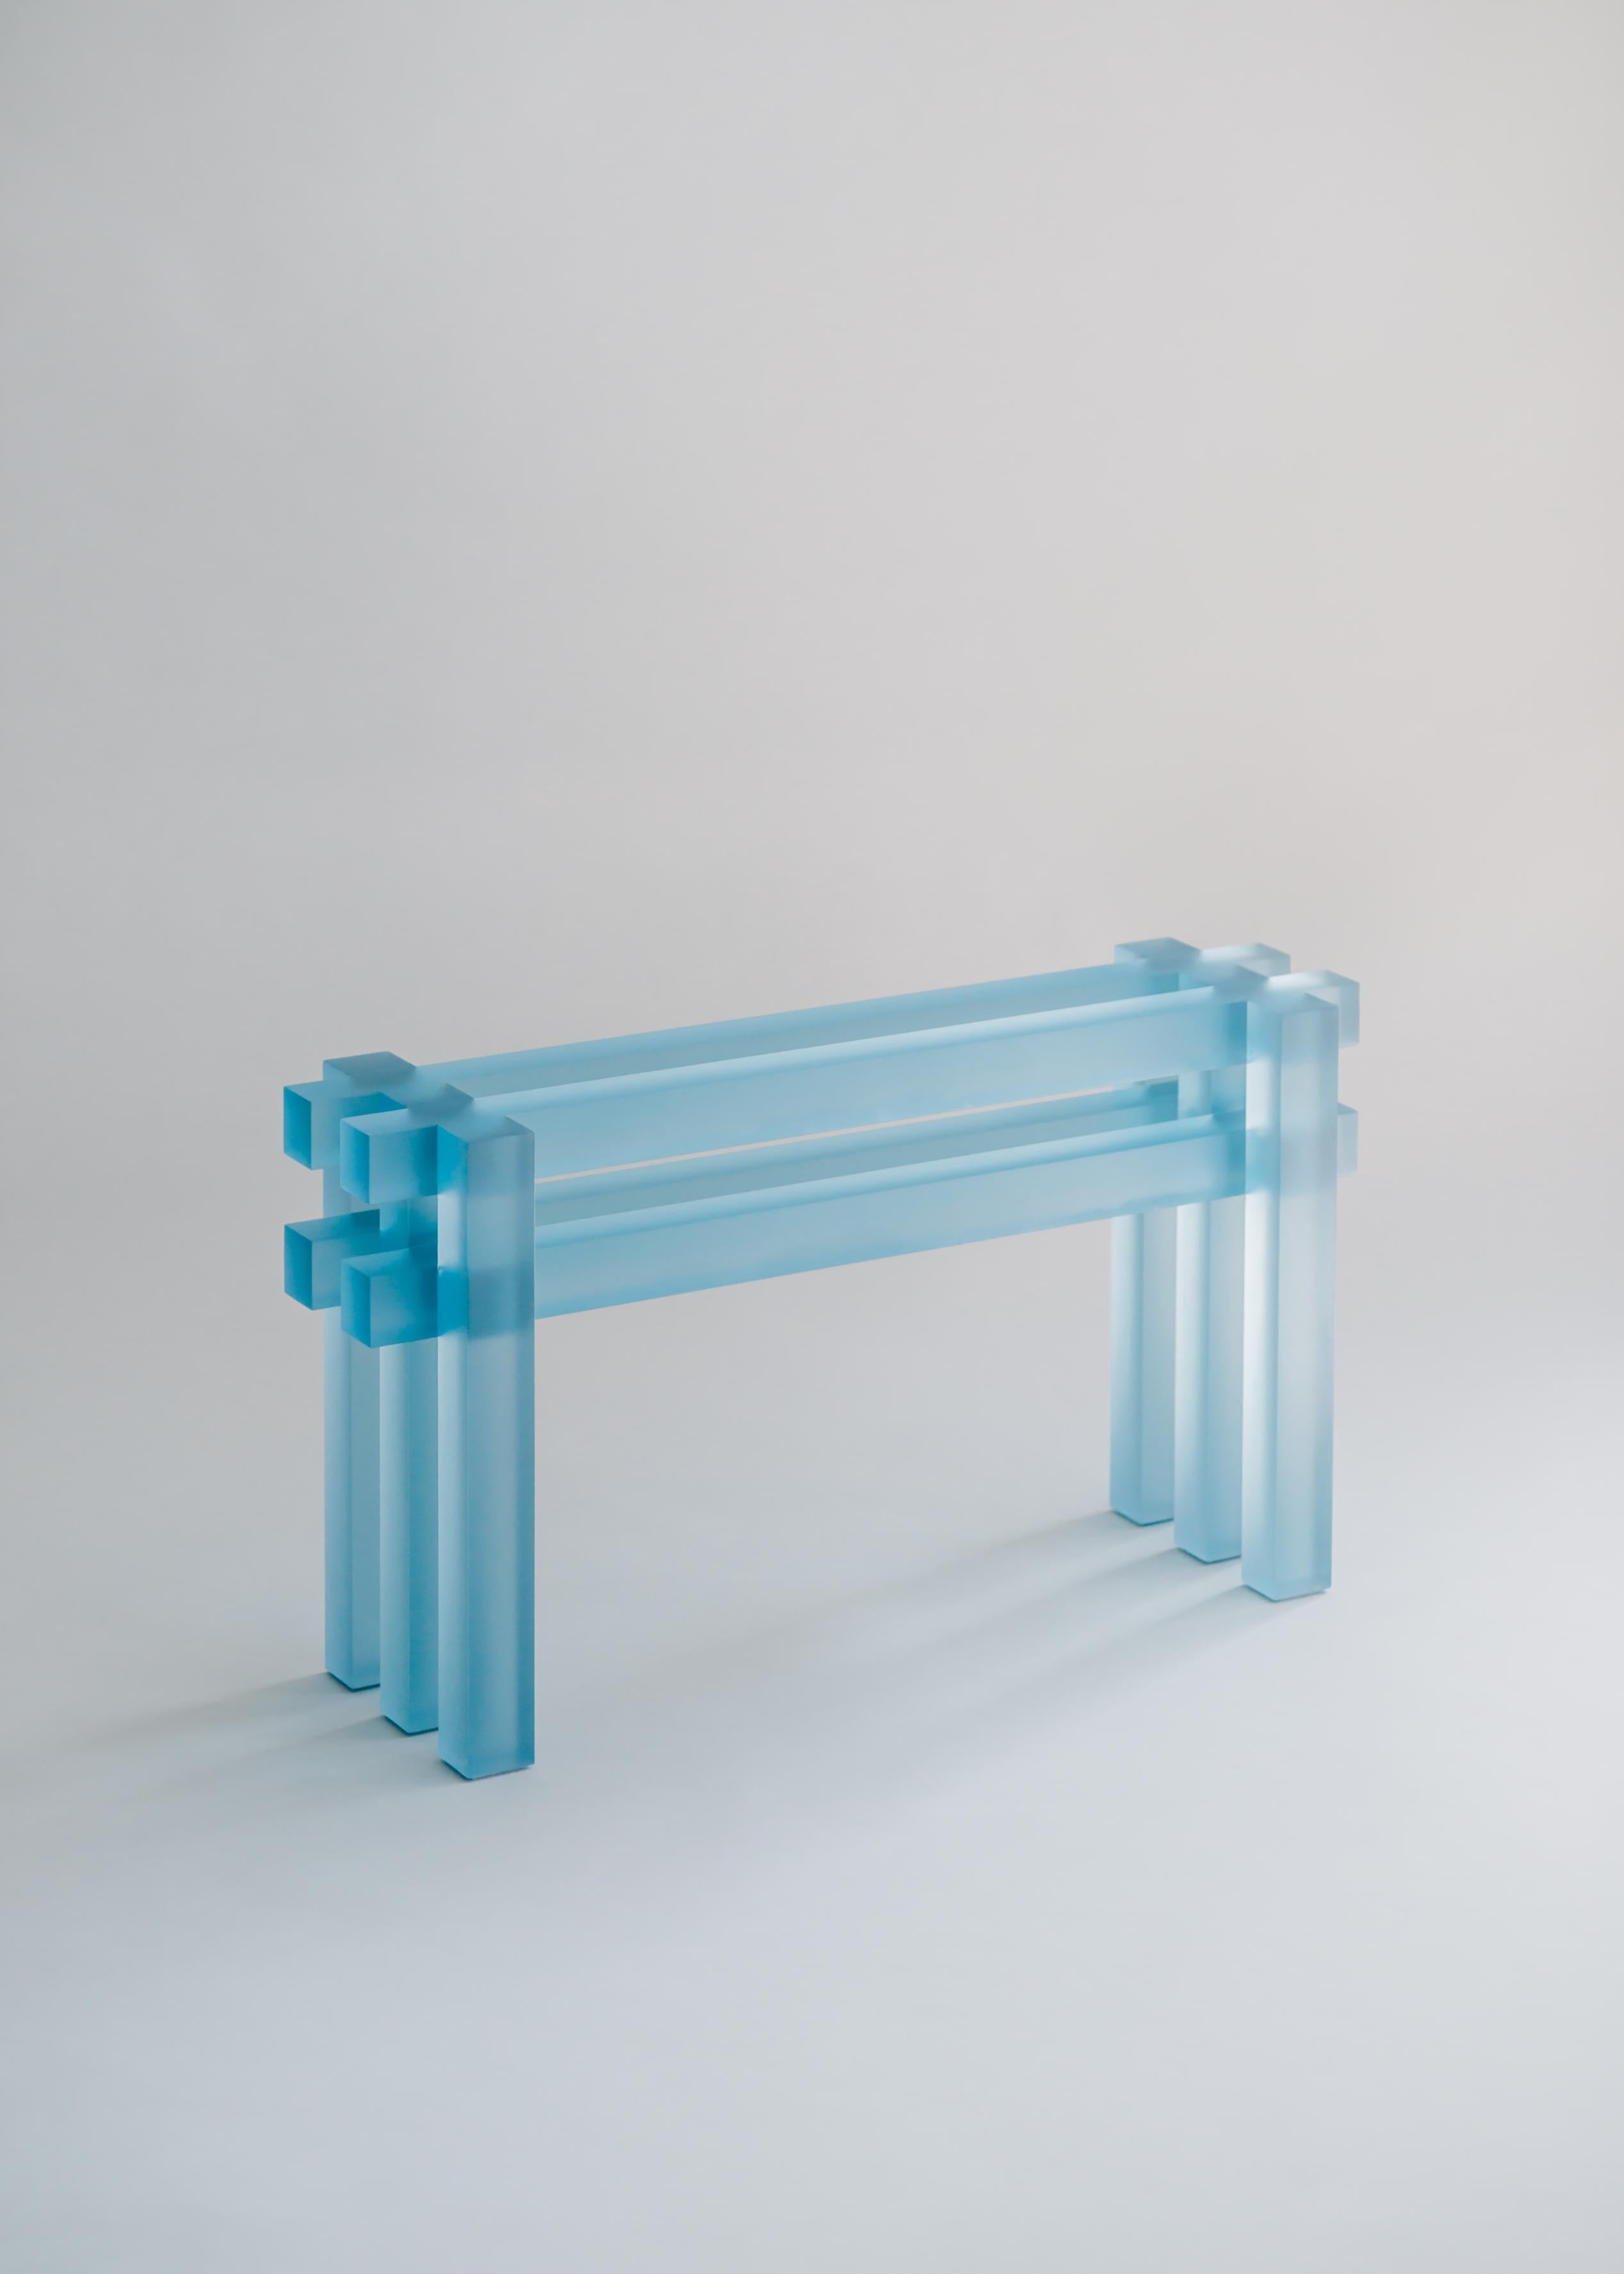 Frosted blue short bench by Laurids Gallée
Dimensions: W 80 x D 25 x H 45 cm
Materials: Resin
Weight: 34 kg

Born in Austria in 1988, Laurids Gallée is based in Rotterdam. After studying Anthropology in Vienna, he moves to the Netherlands,